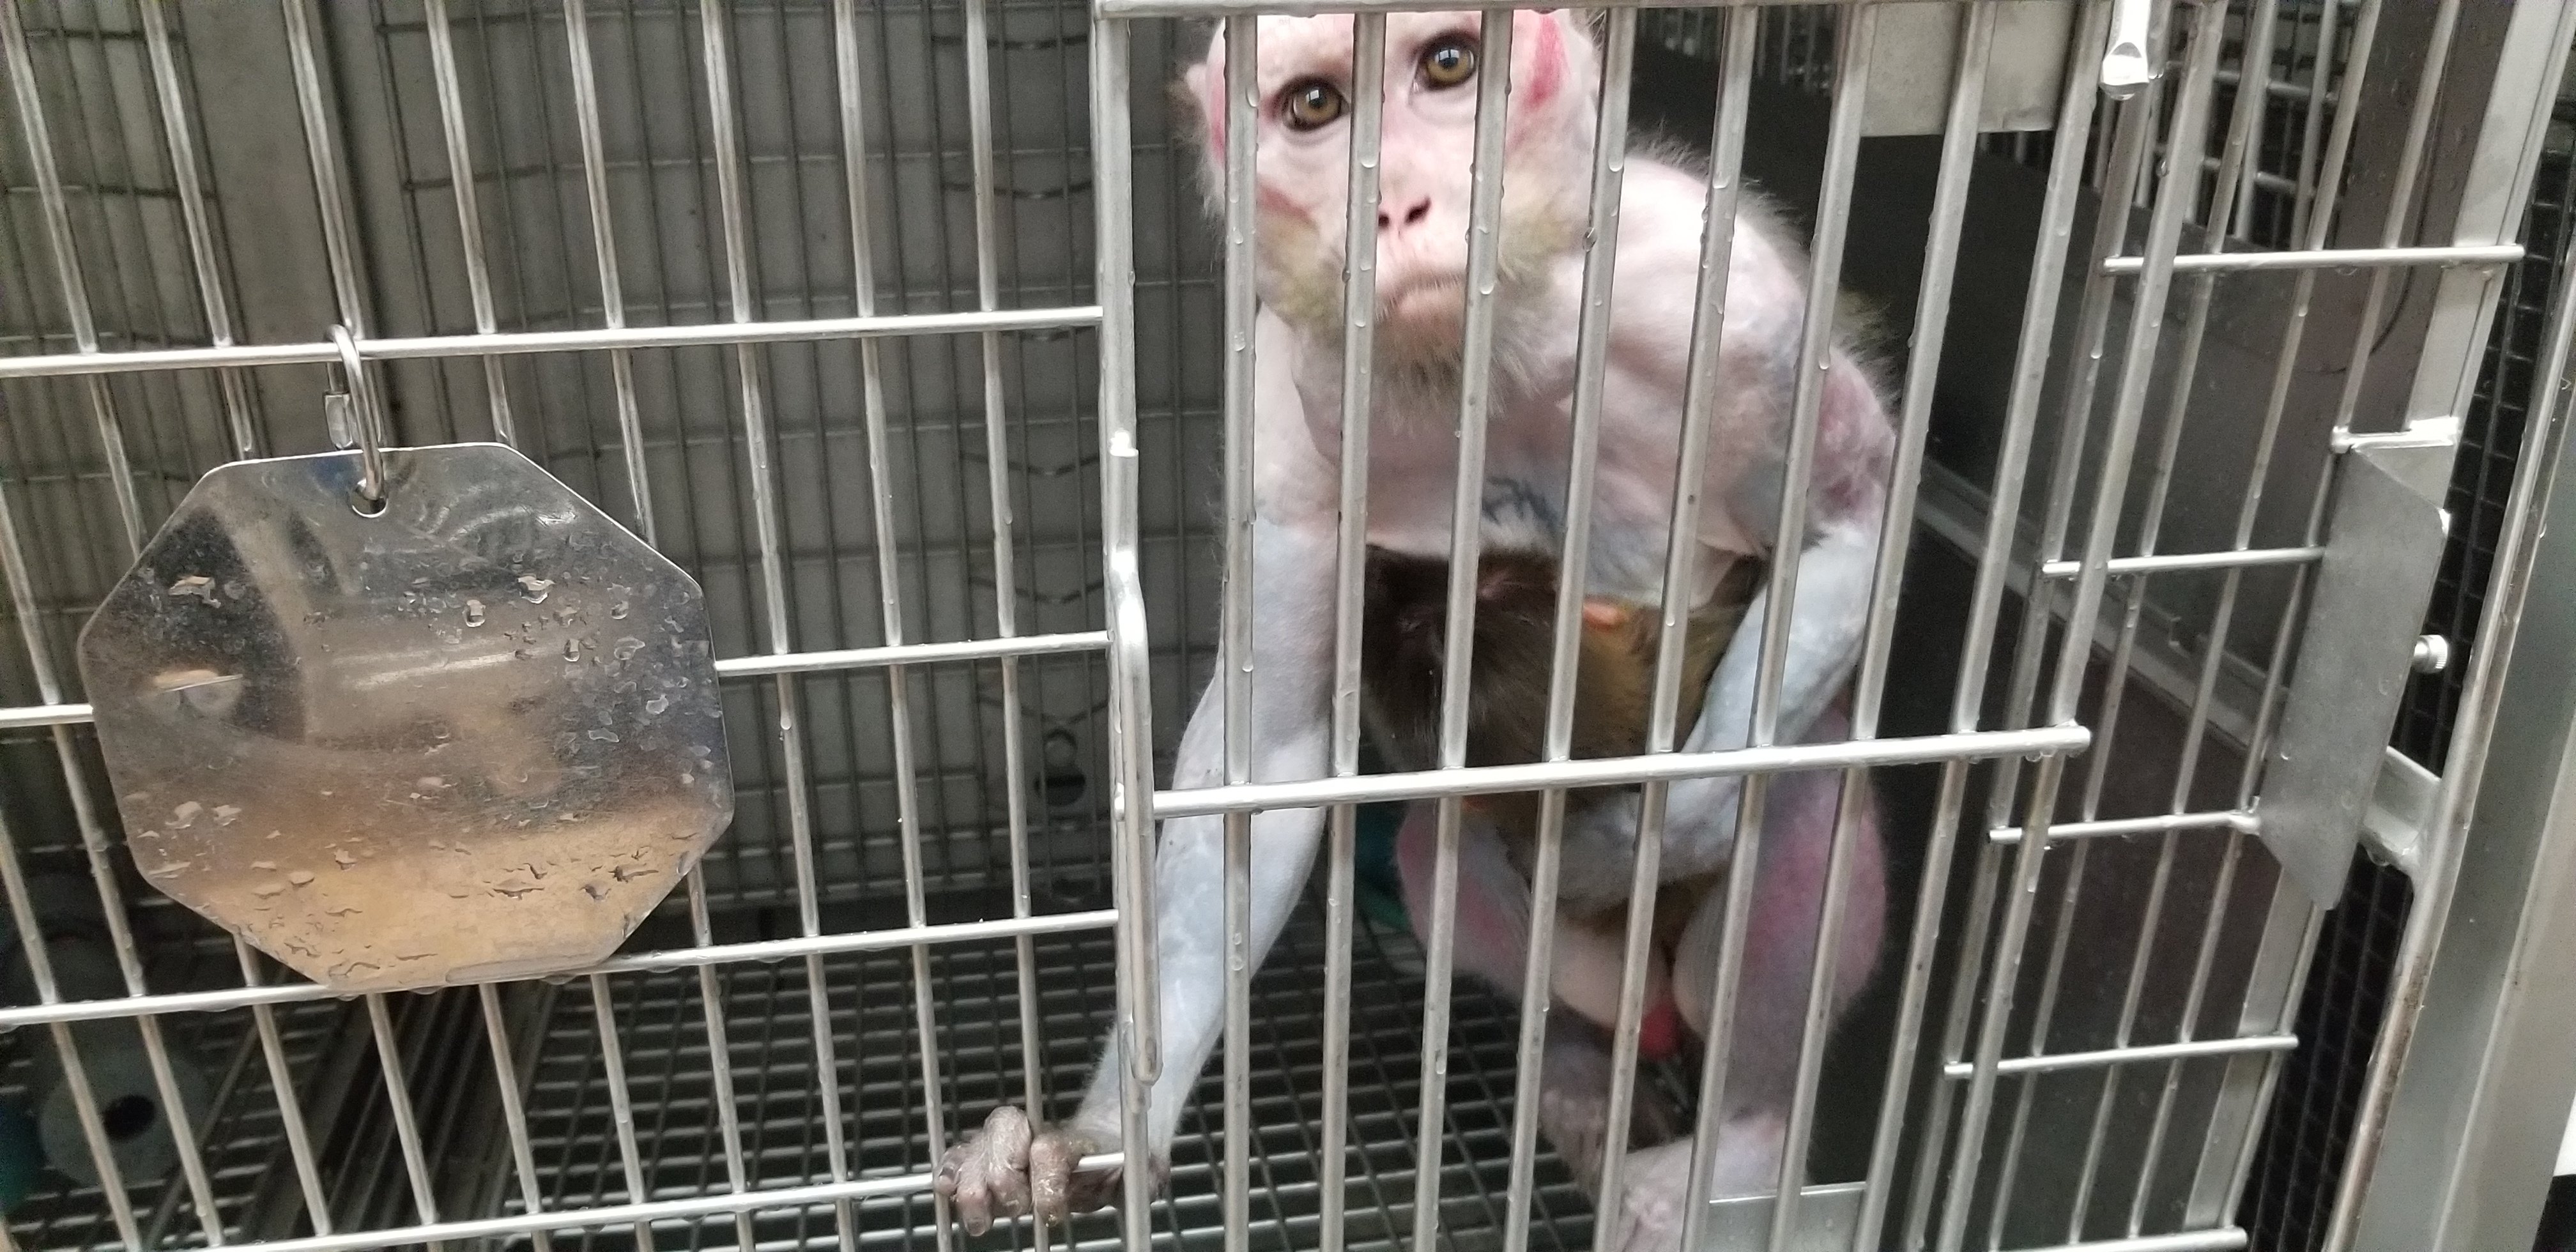 Princess the monkey in a cage